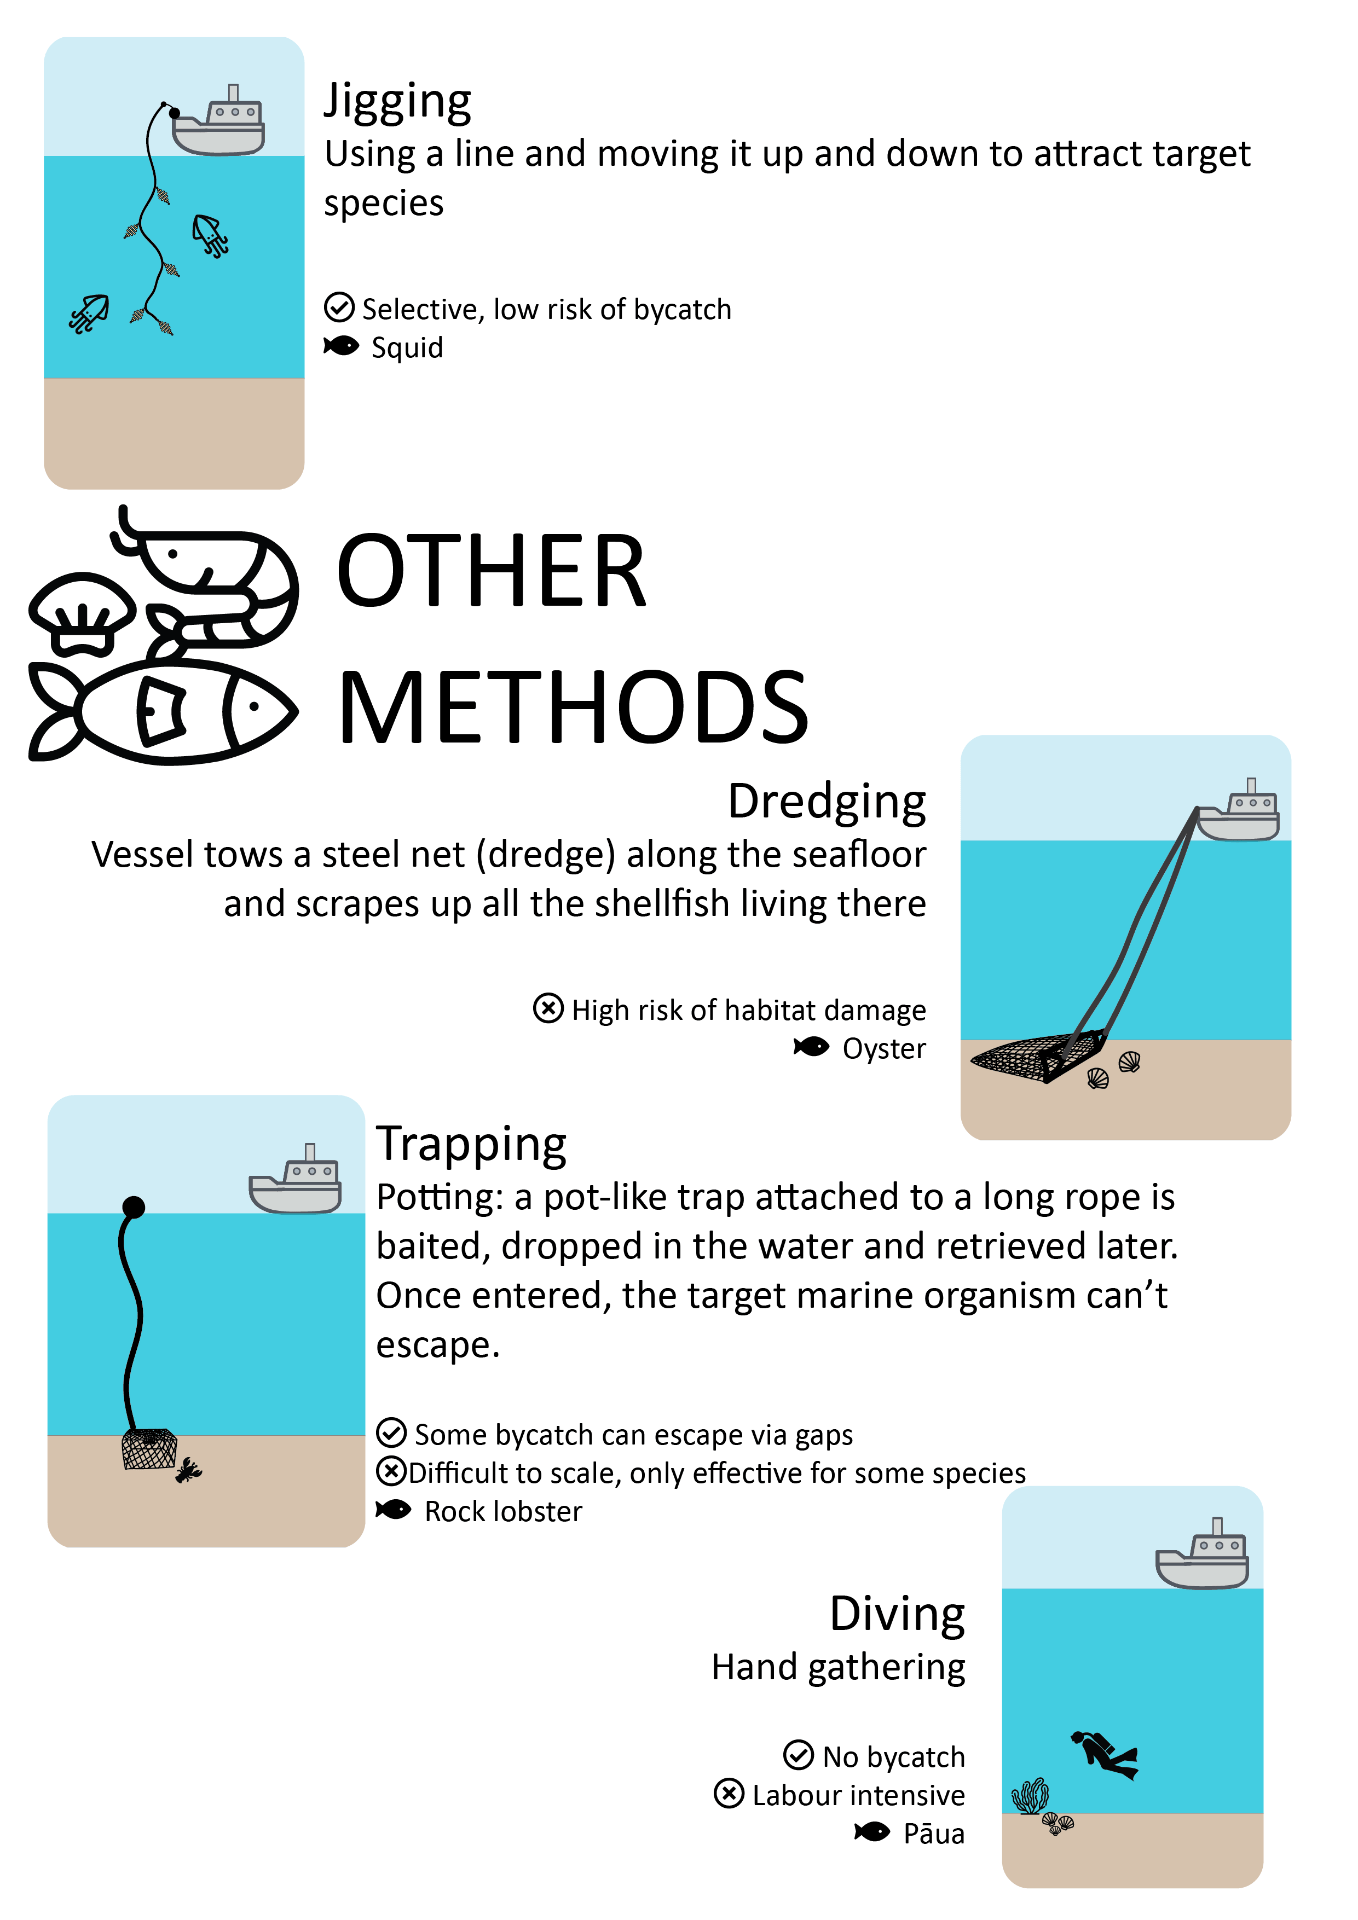 Jigging involves using a line and moving it up and down to attract target species. It is selective with a low risk of bycatch. Other methods include dredging, where a vessel tows a steel net (dredge_ along the seafloor and scrapes up all the shellfish living there. This has a high risk of habitat damage. Trapping or potting uses a pot-like trap attached to a long rope which is baited, dropped in the water and retrieved later. Once entered, the target marine organism can't escape. Some bycatch can escape via gaps. Trapping is difficult to scale and is only effective for some species. Diving to hand-gather species such as pāua does not have any bycatch but is labour intensive.